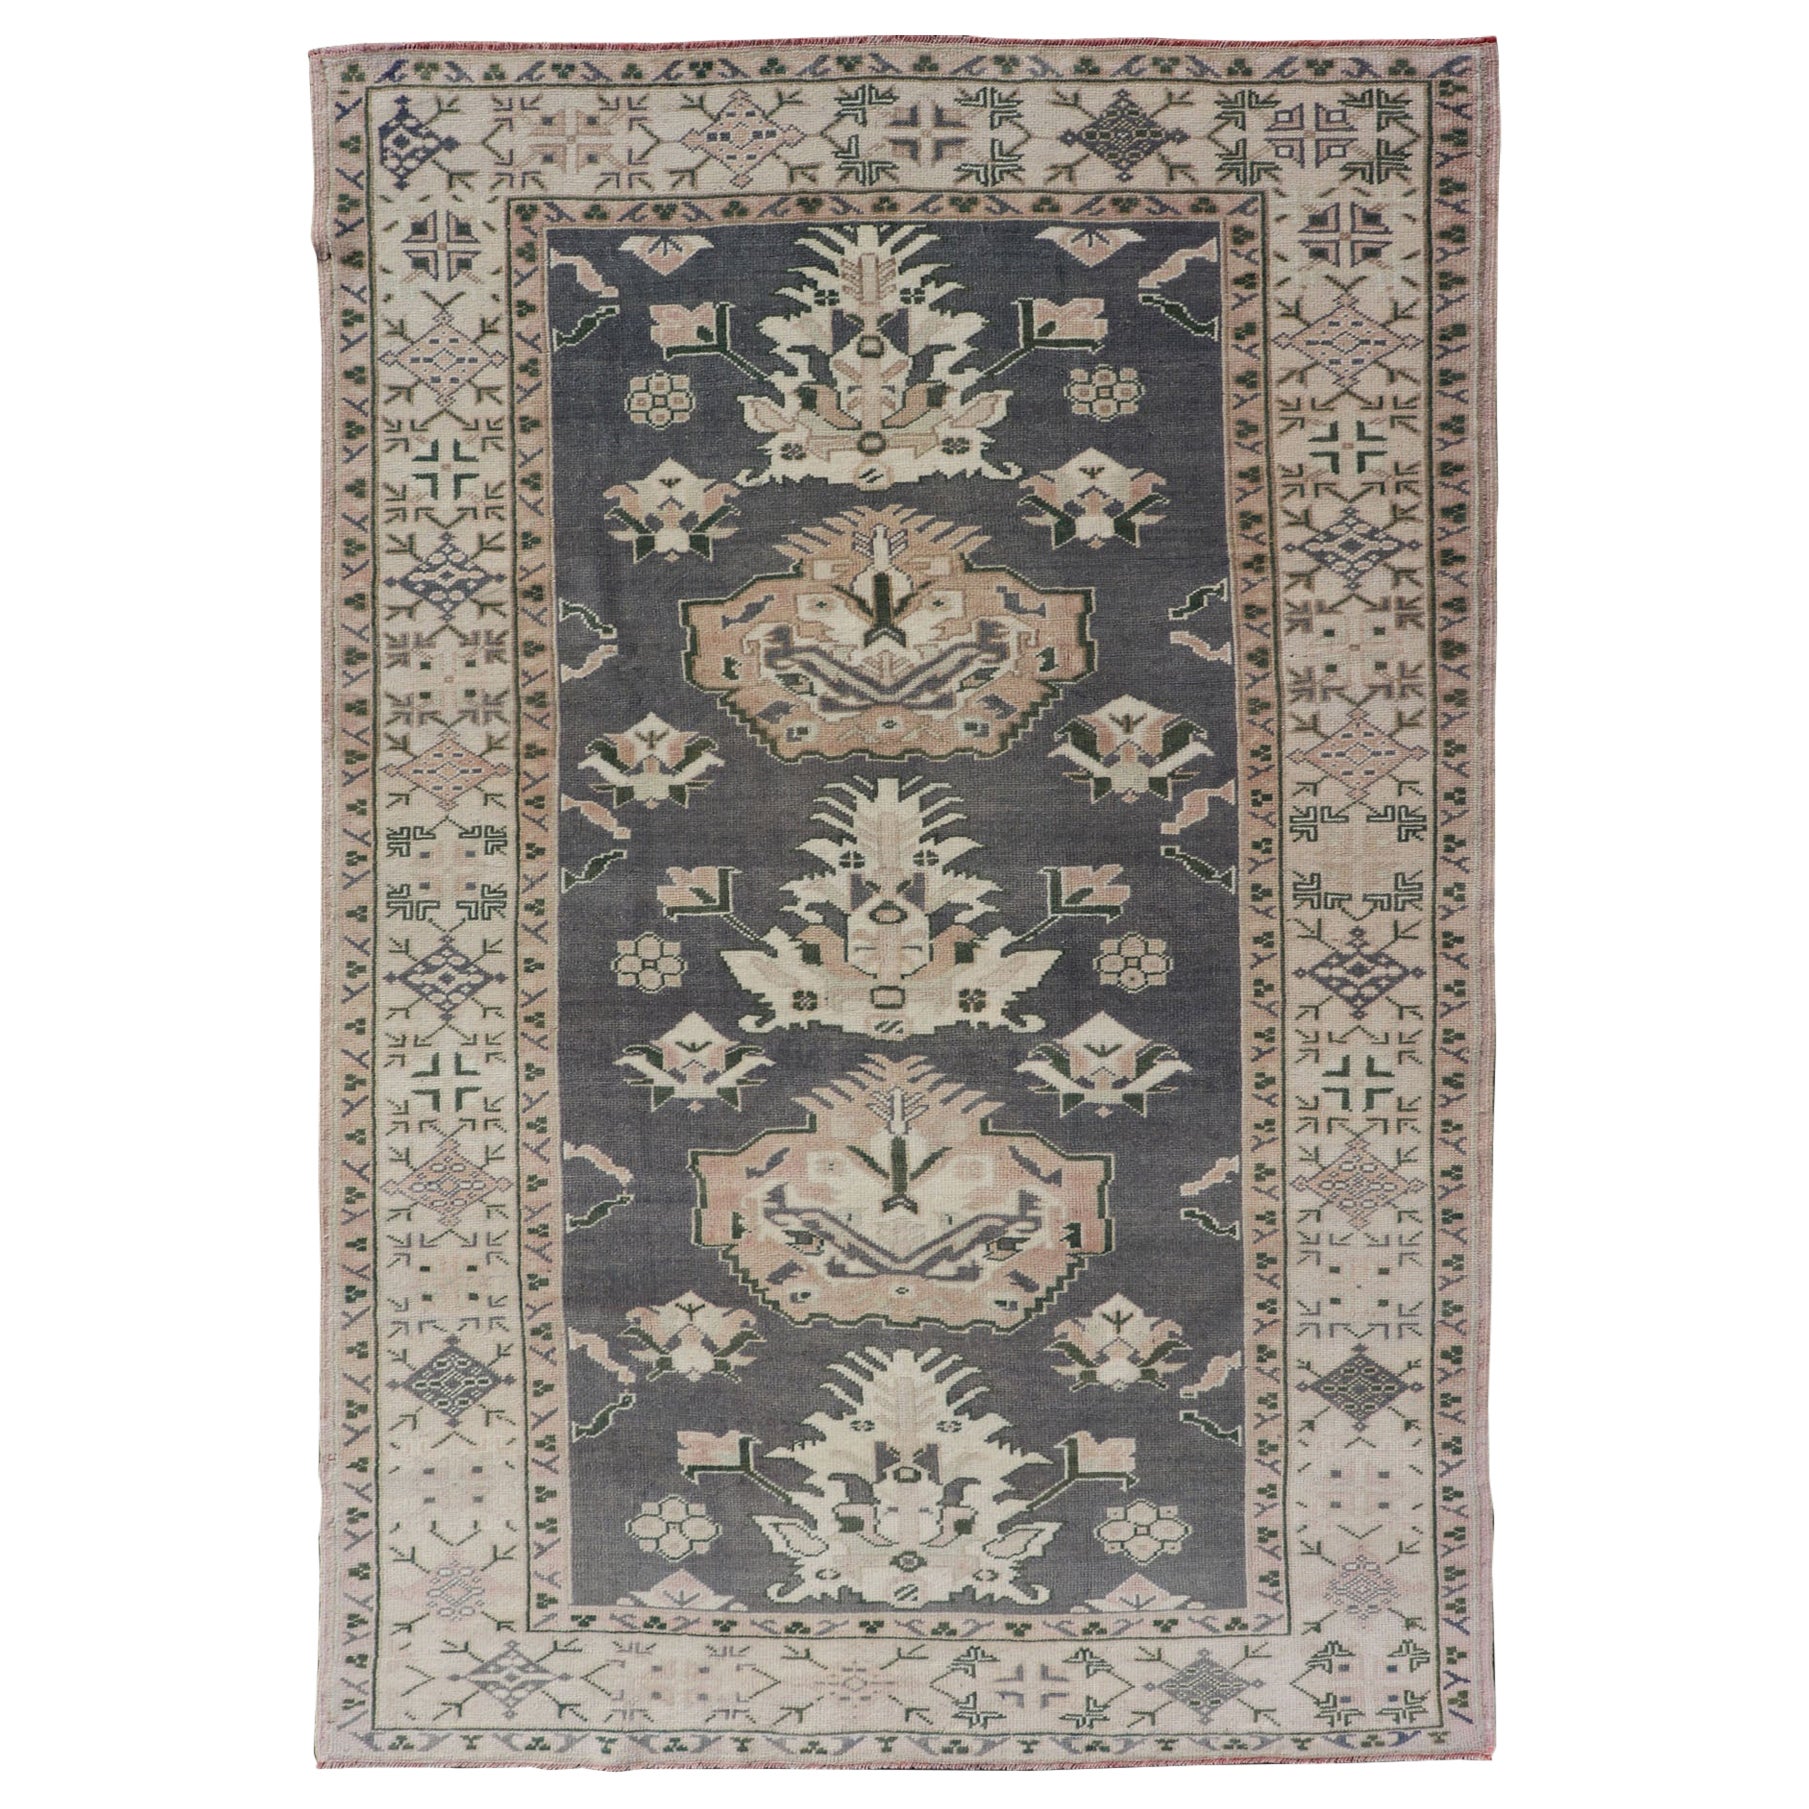 Turkish Oushak Rug Vintage with Three Floral Medallion Design In Blue and Cream For Sale